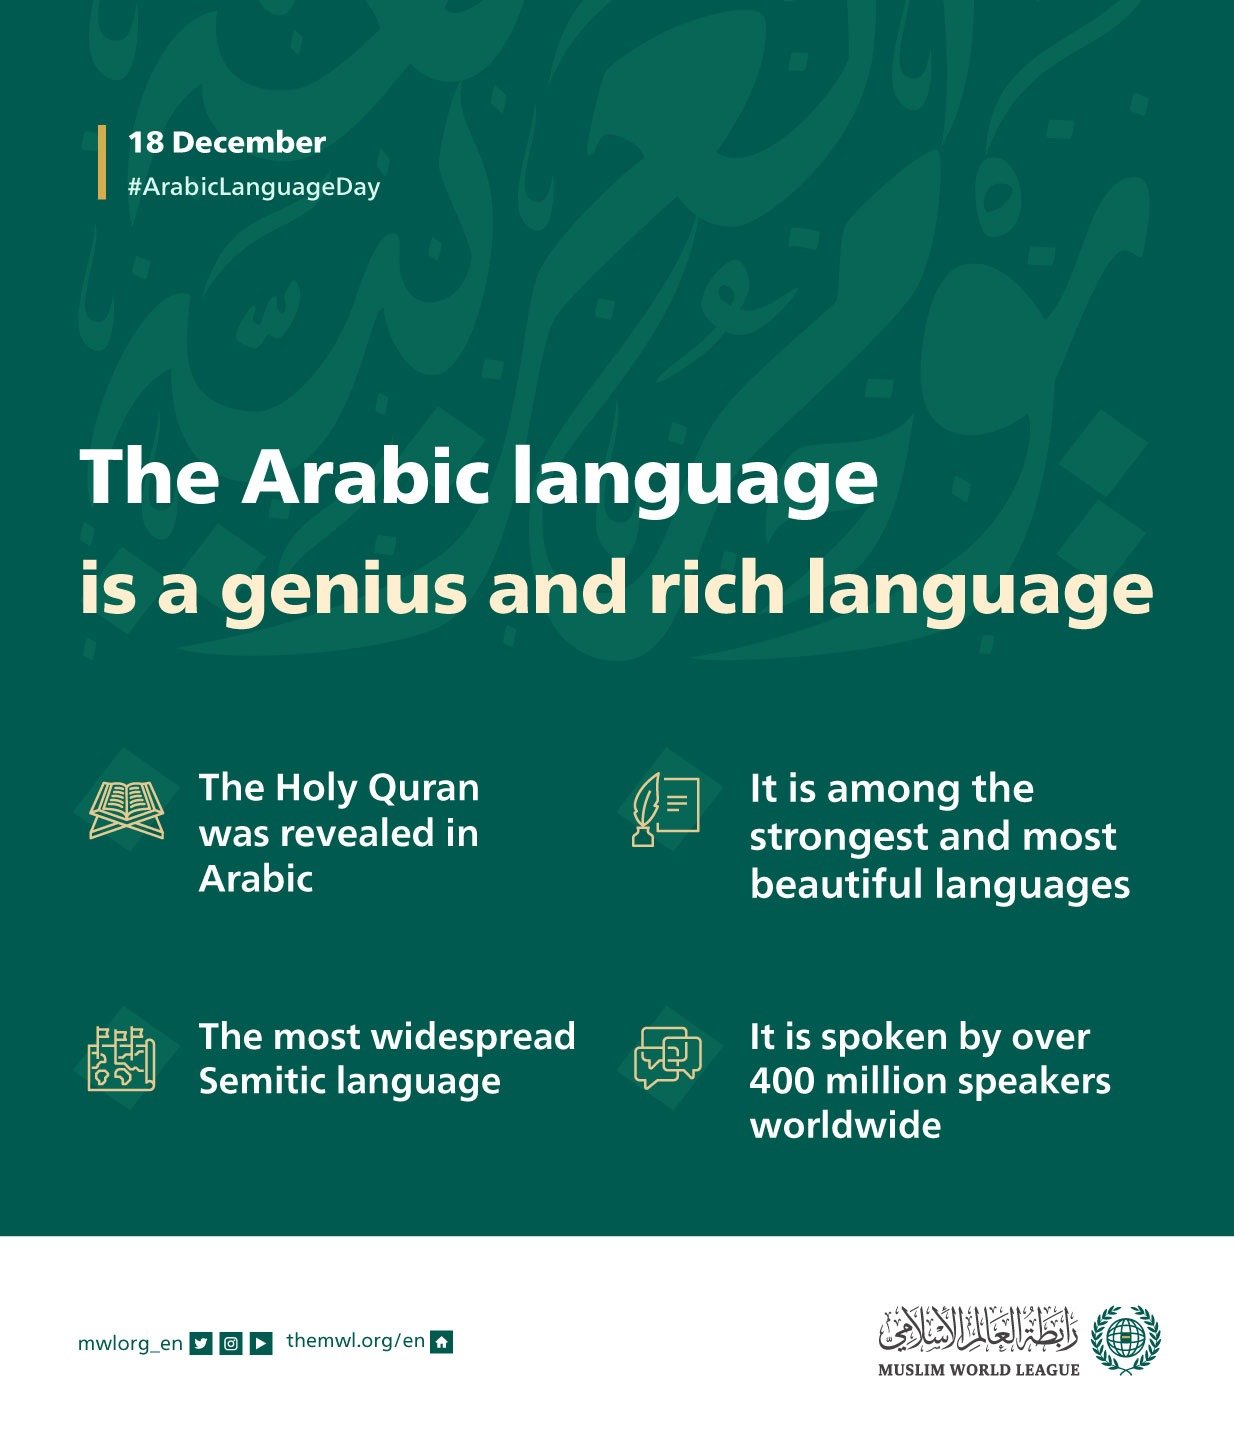 The Arabic language is a genius and rich language